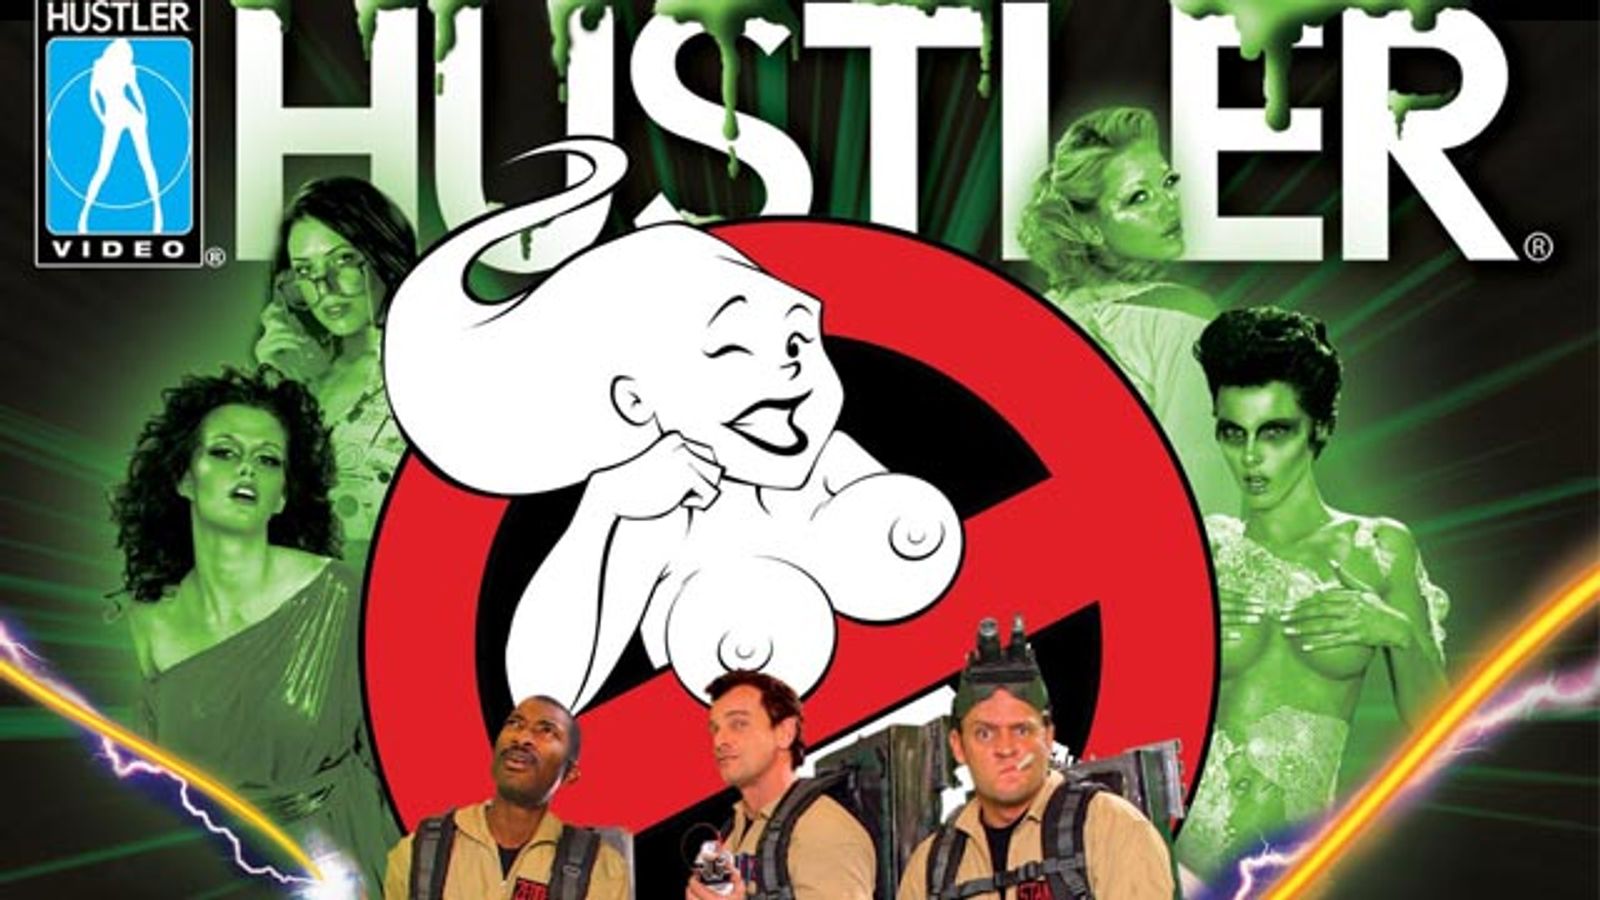 Hustler Sets May 25 Street Date for 3D ‘Ghostbusters’ Parody